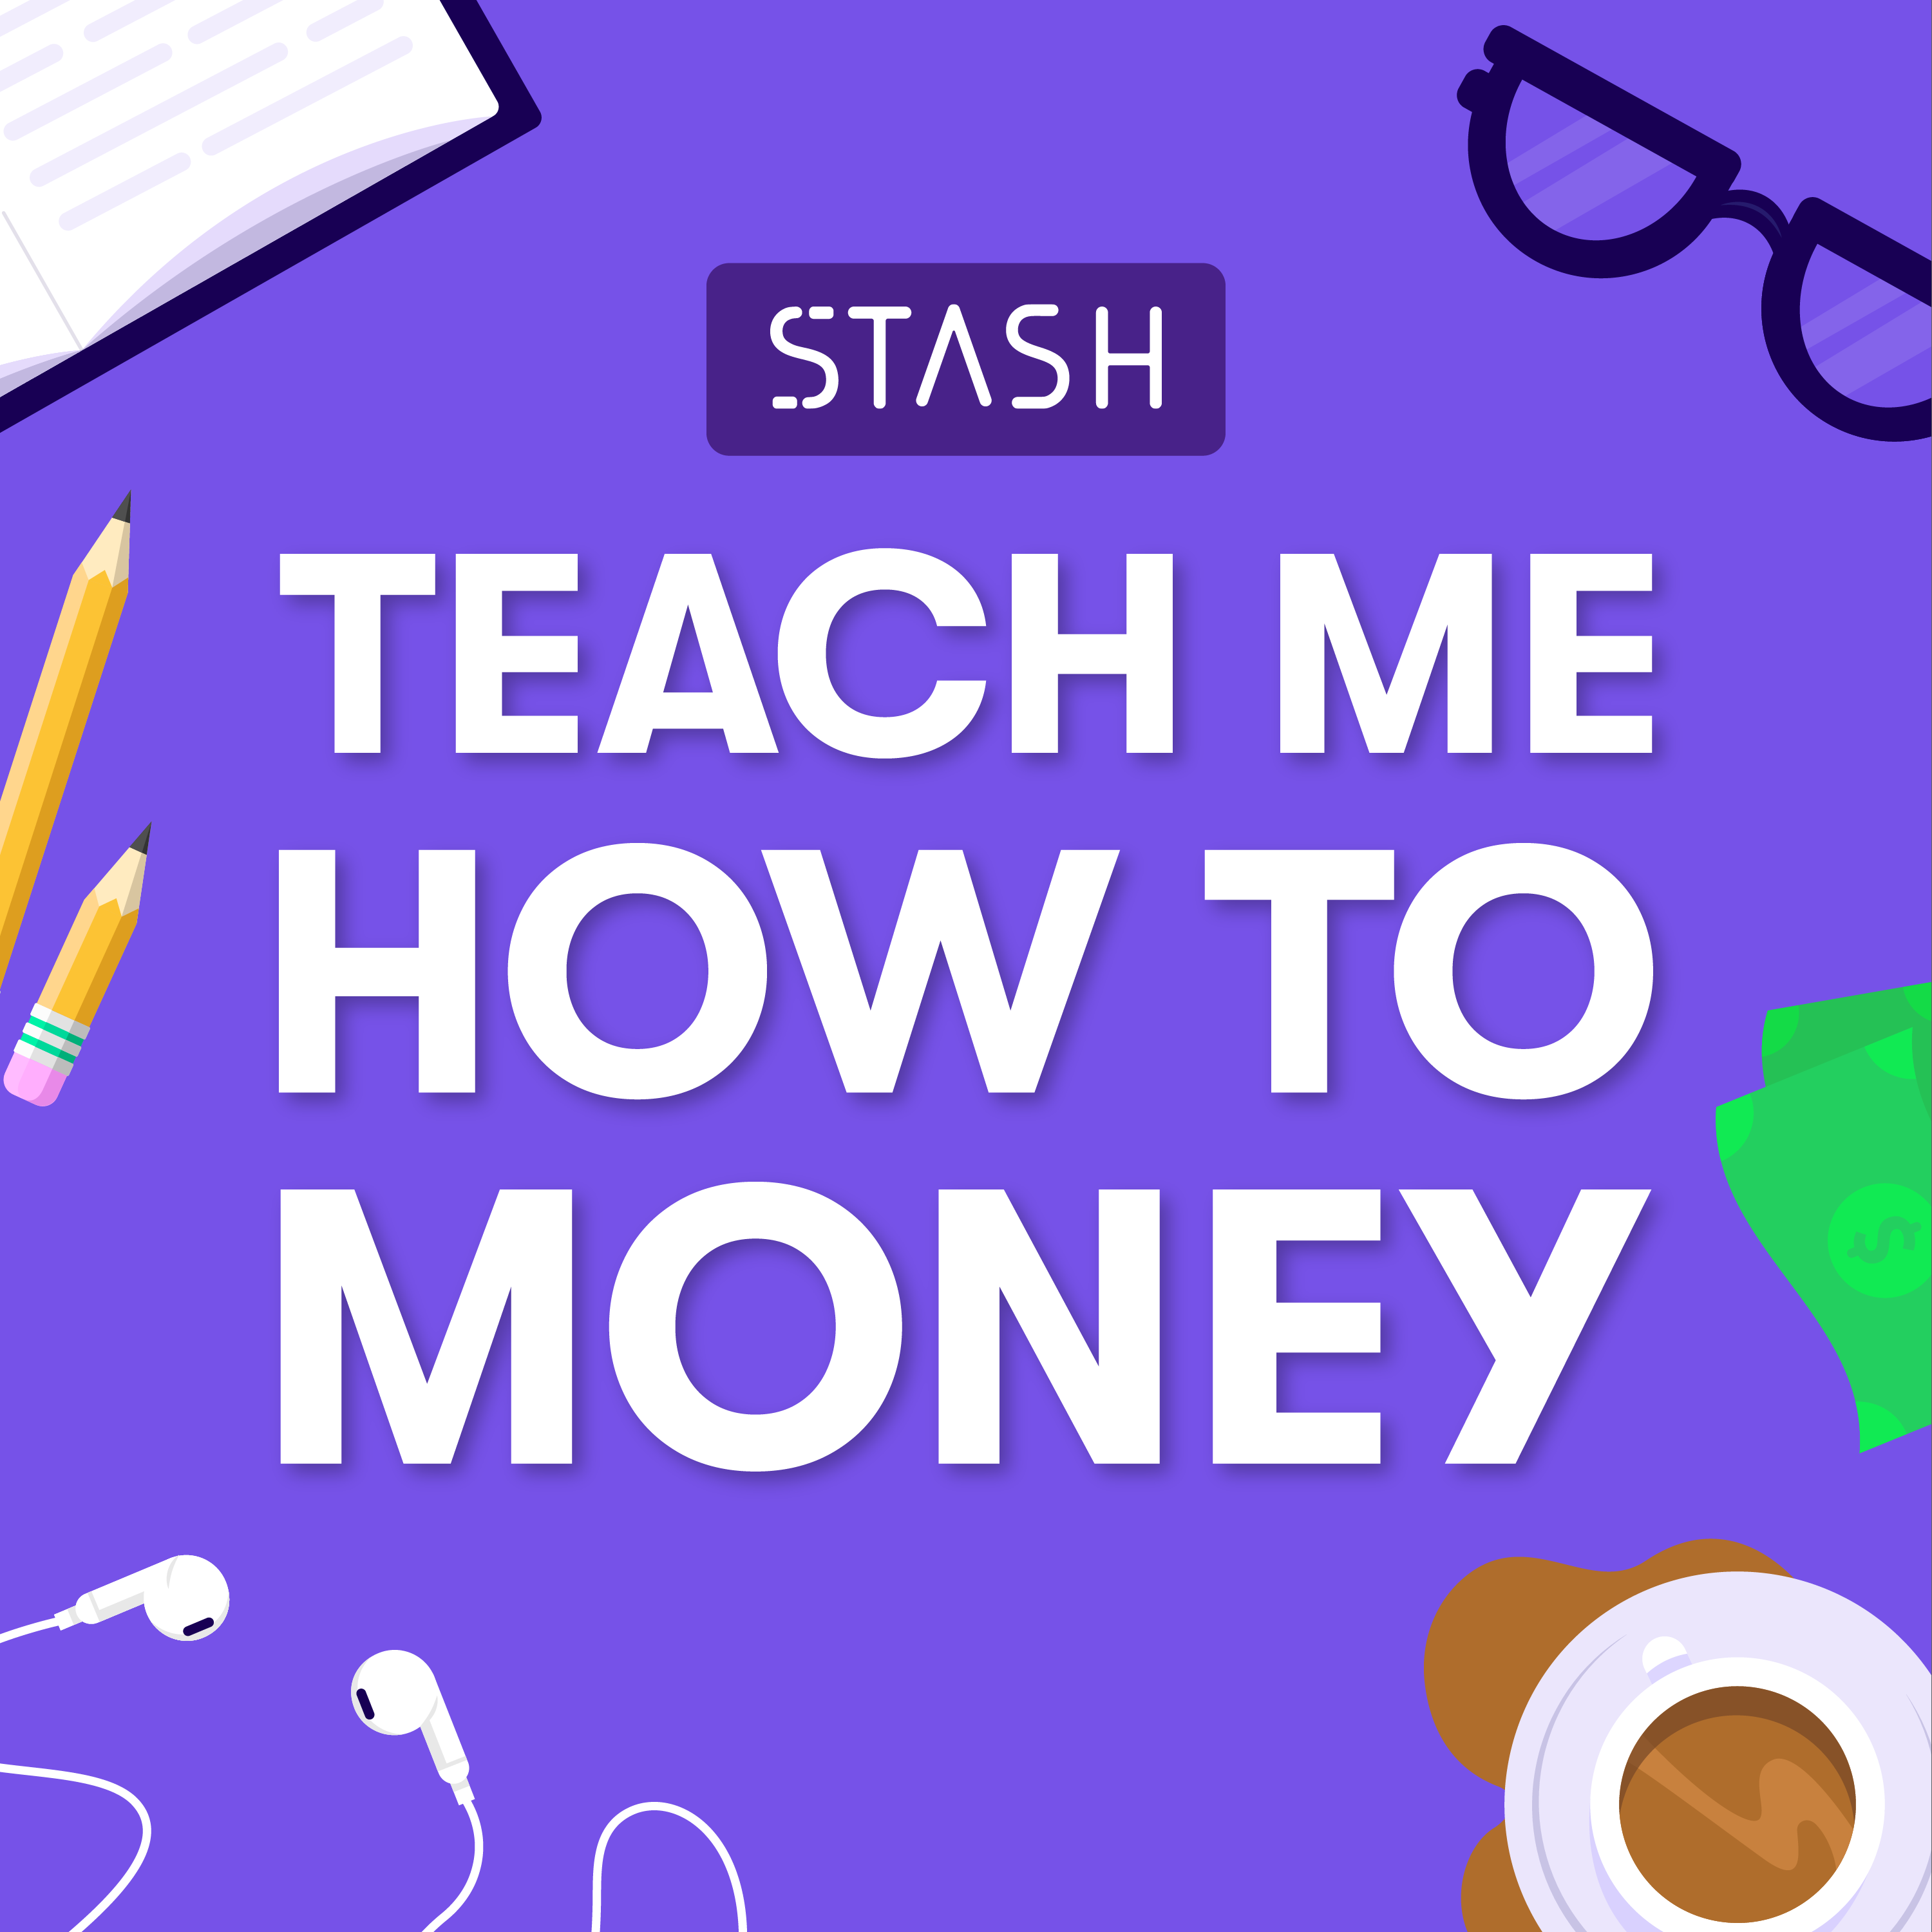 Teach Me How to Money: A New Podcast From Stash